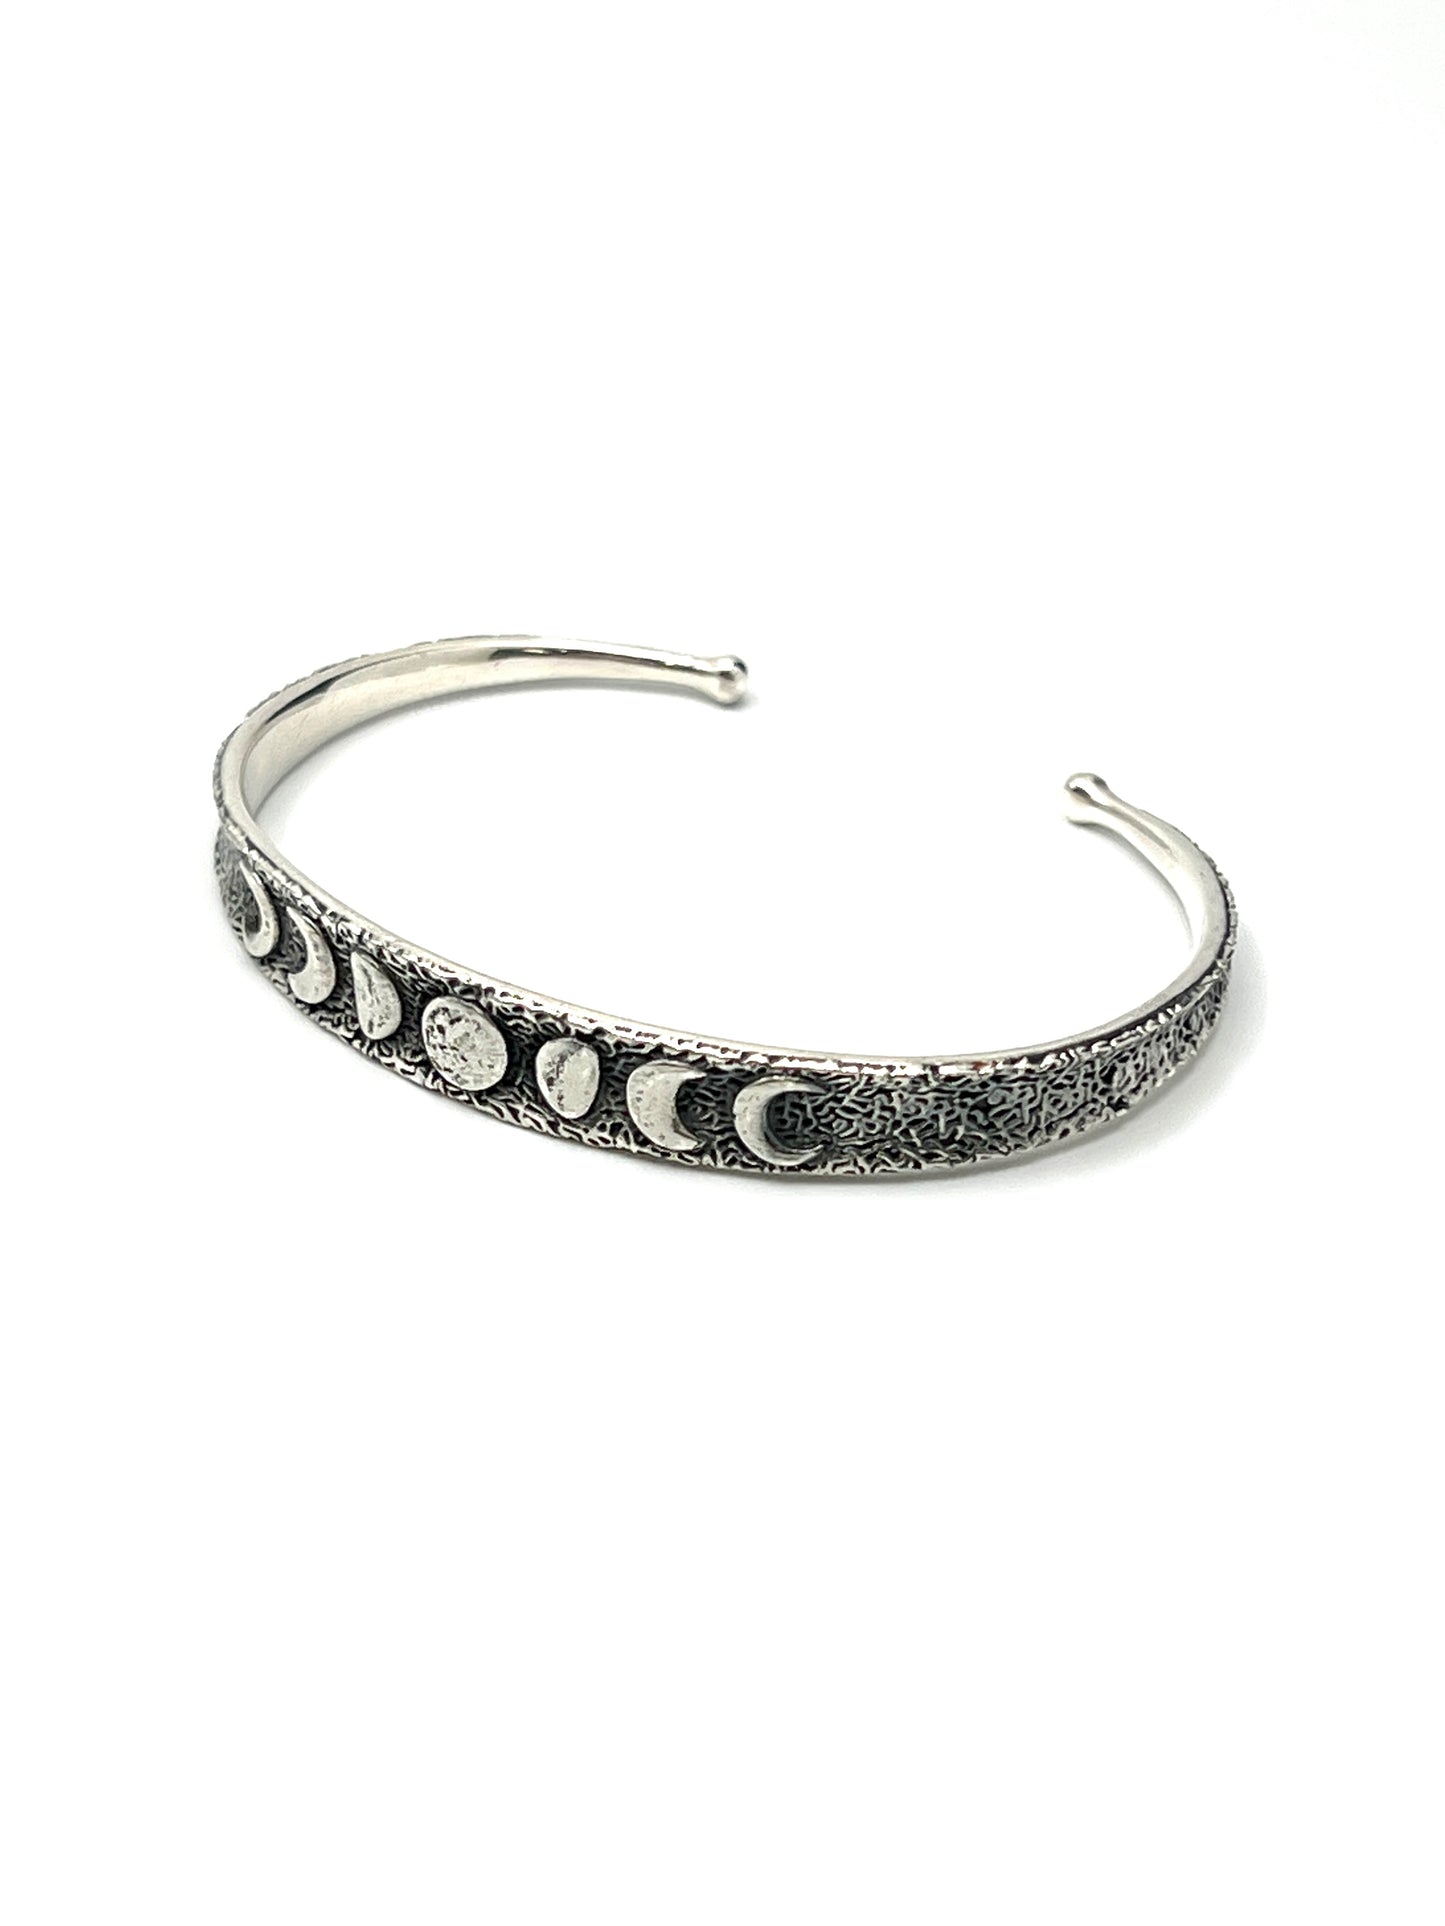 Oxidized Silver Moon Phases Cuff